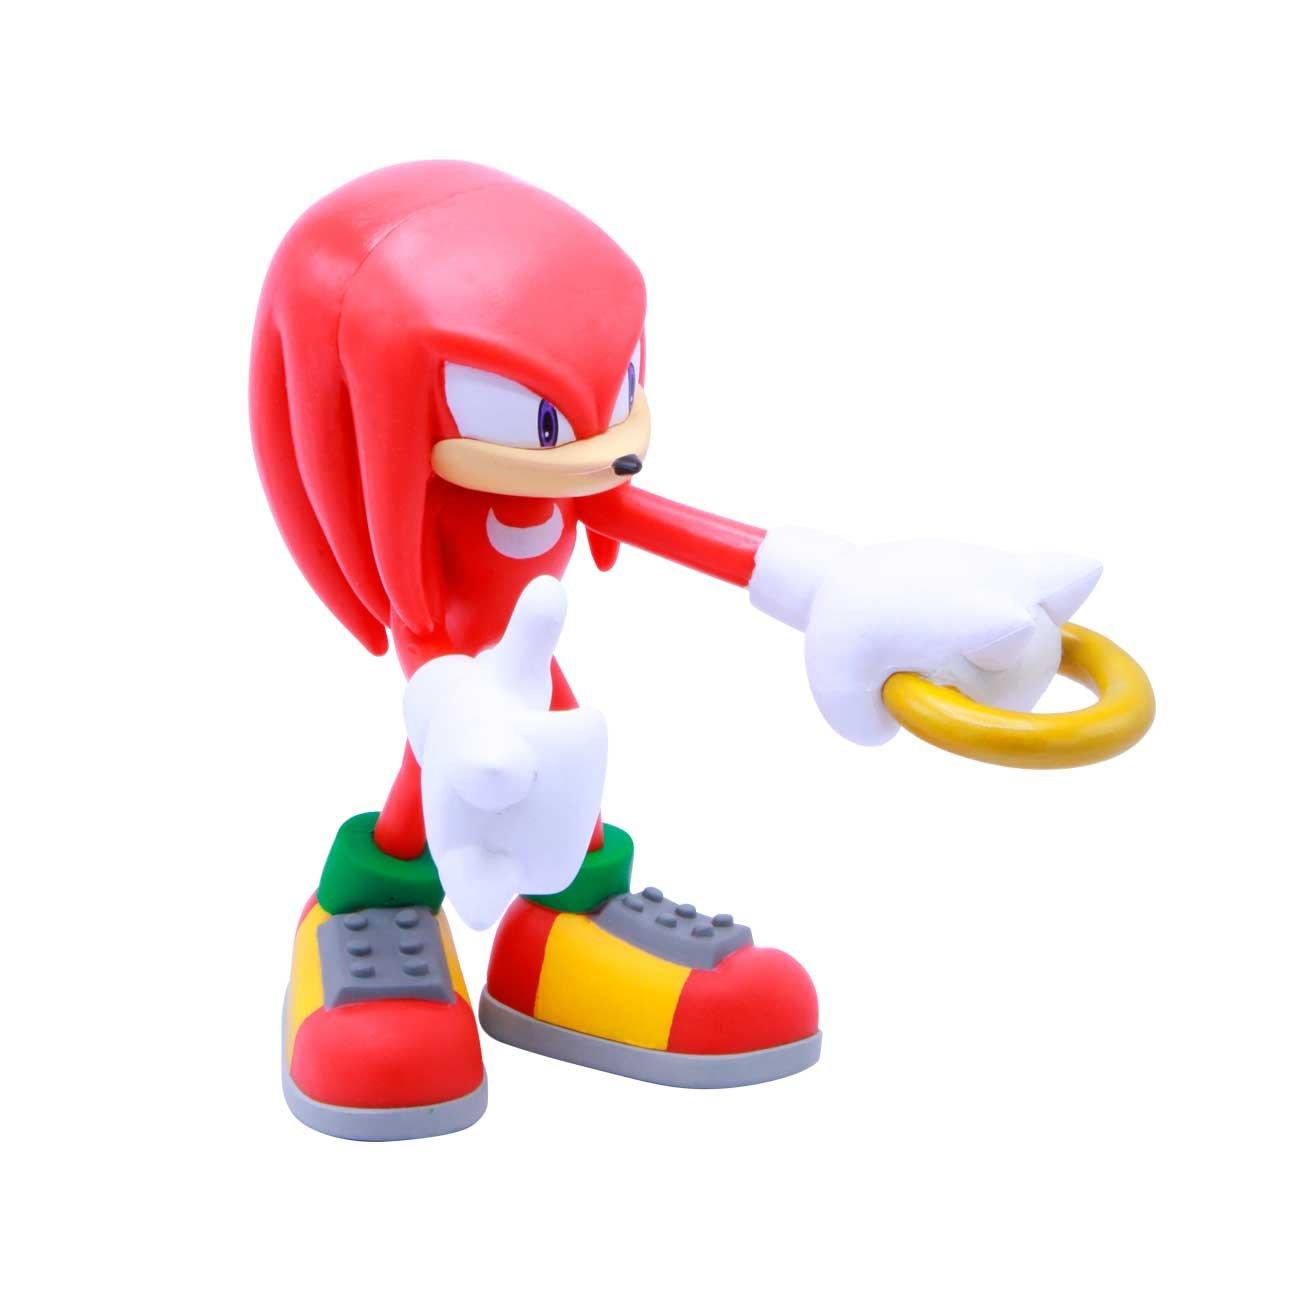 Just Toys Sonic the Hedgehog Knuckles Buildable 4-in Action Figure